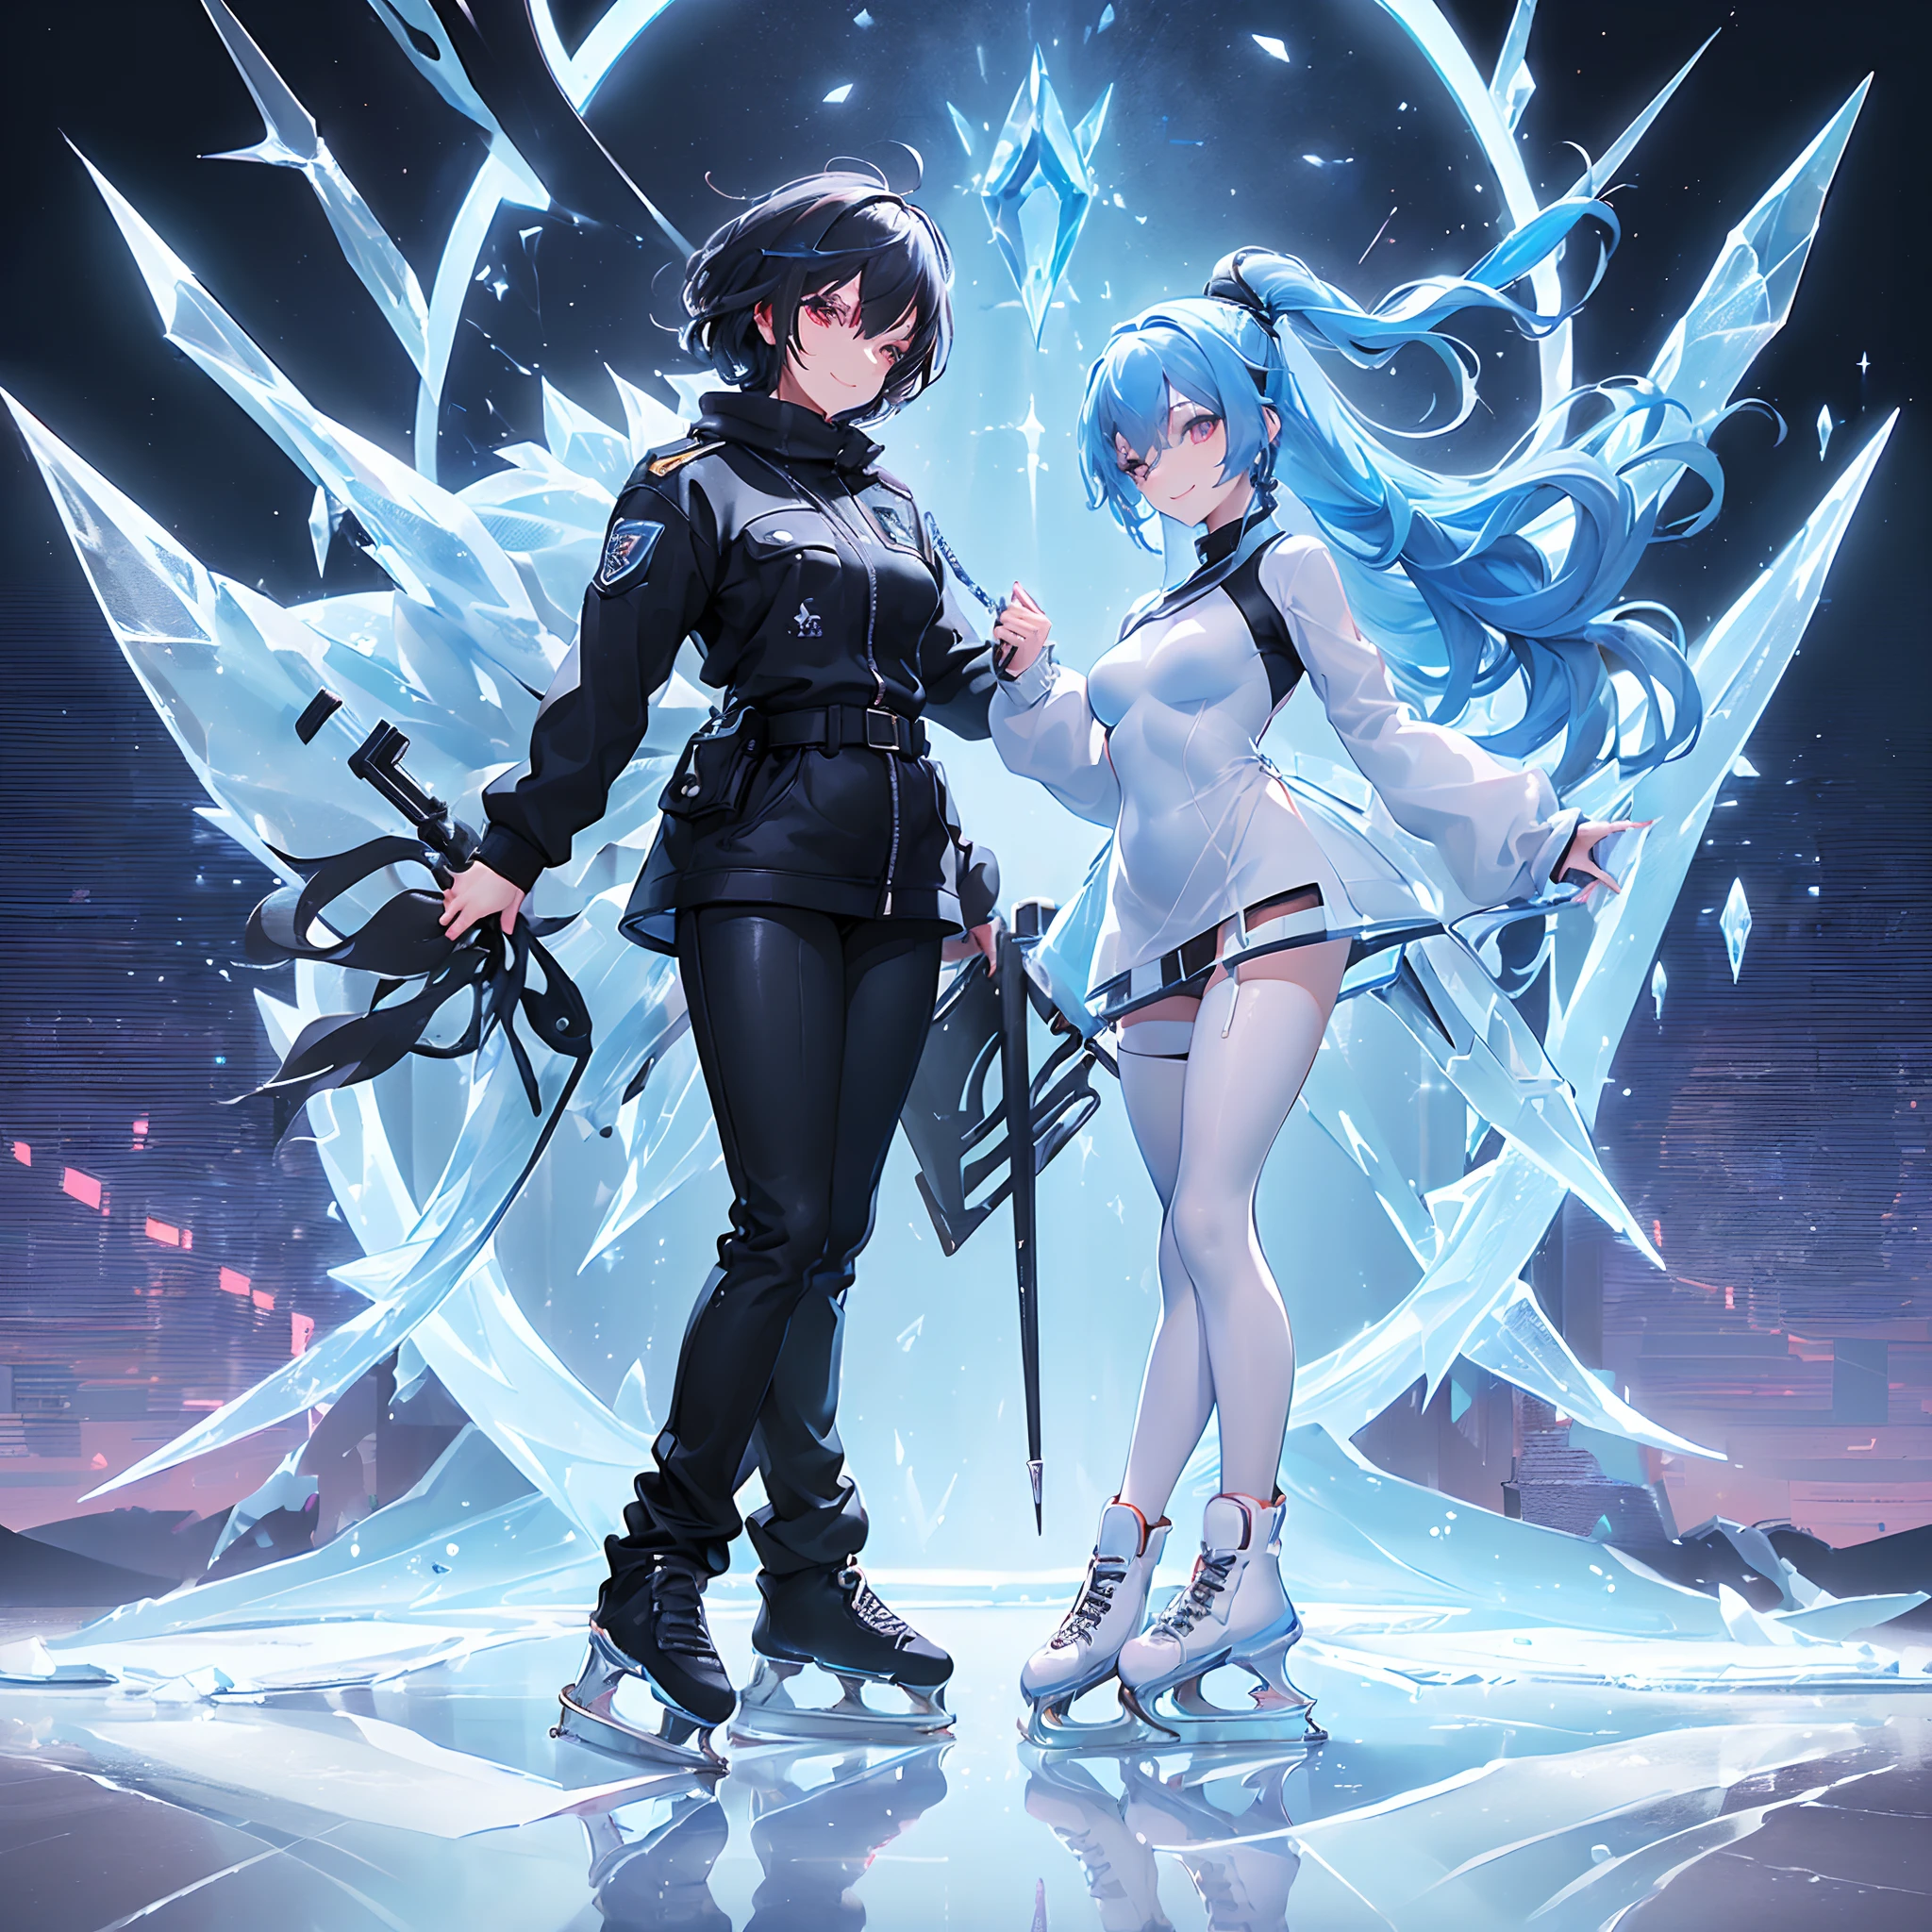 ((((fullllbody,Ice skaters in thick clothes, sensual smiling, 1 persons)))No background, One Young Woman, police officers,Ice-based weapons,blue hairs, red hairs, eye reflections, Open Makeup, high detailing, Gothic art, Ray tracing reflected light, masutepiece,  Super Detail, high detailing, High quality, Better Quality